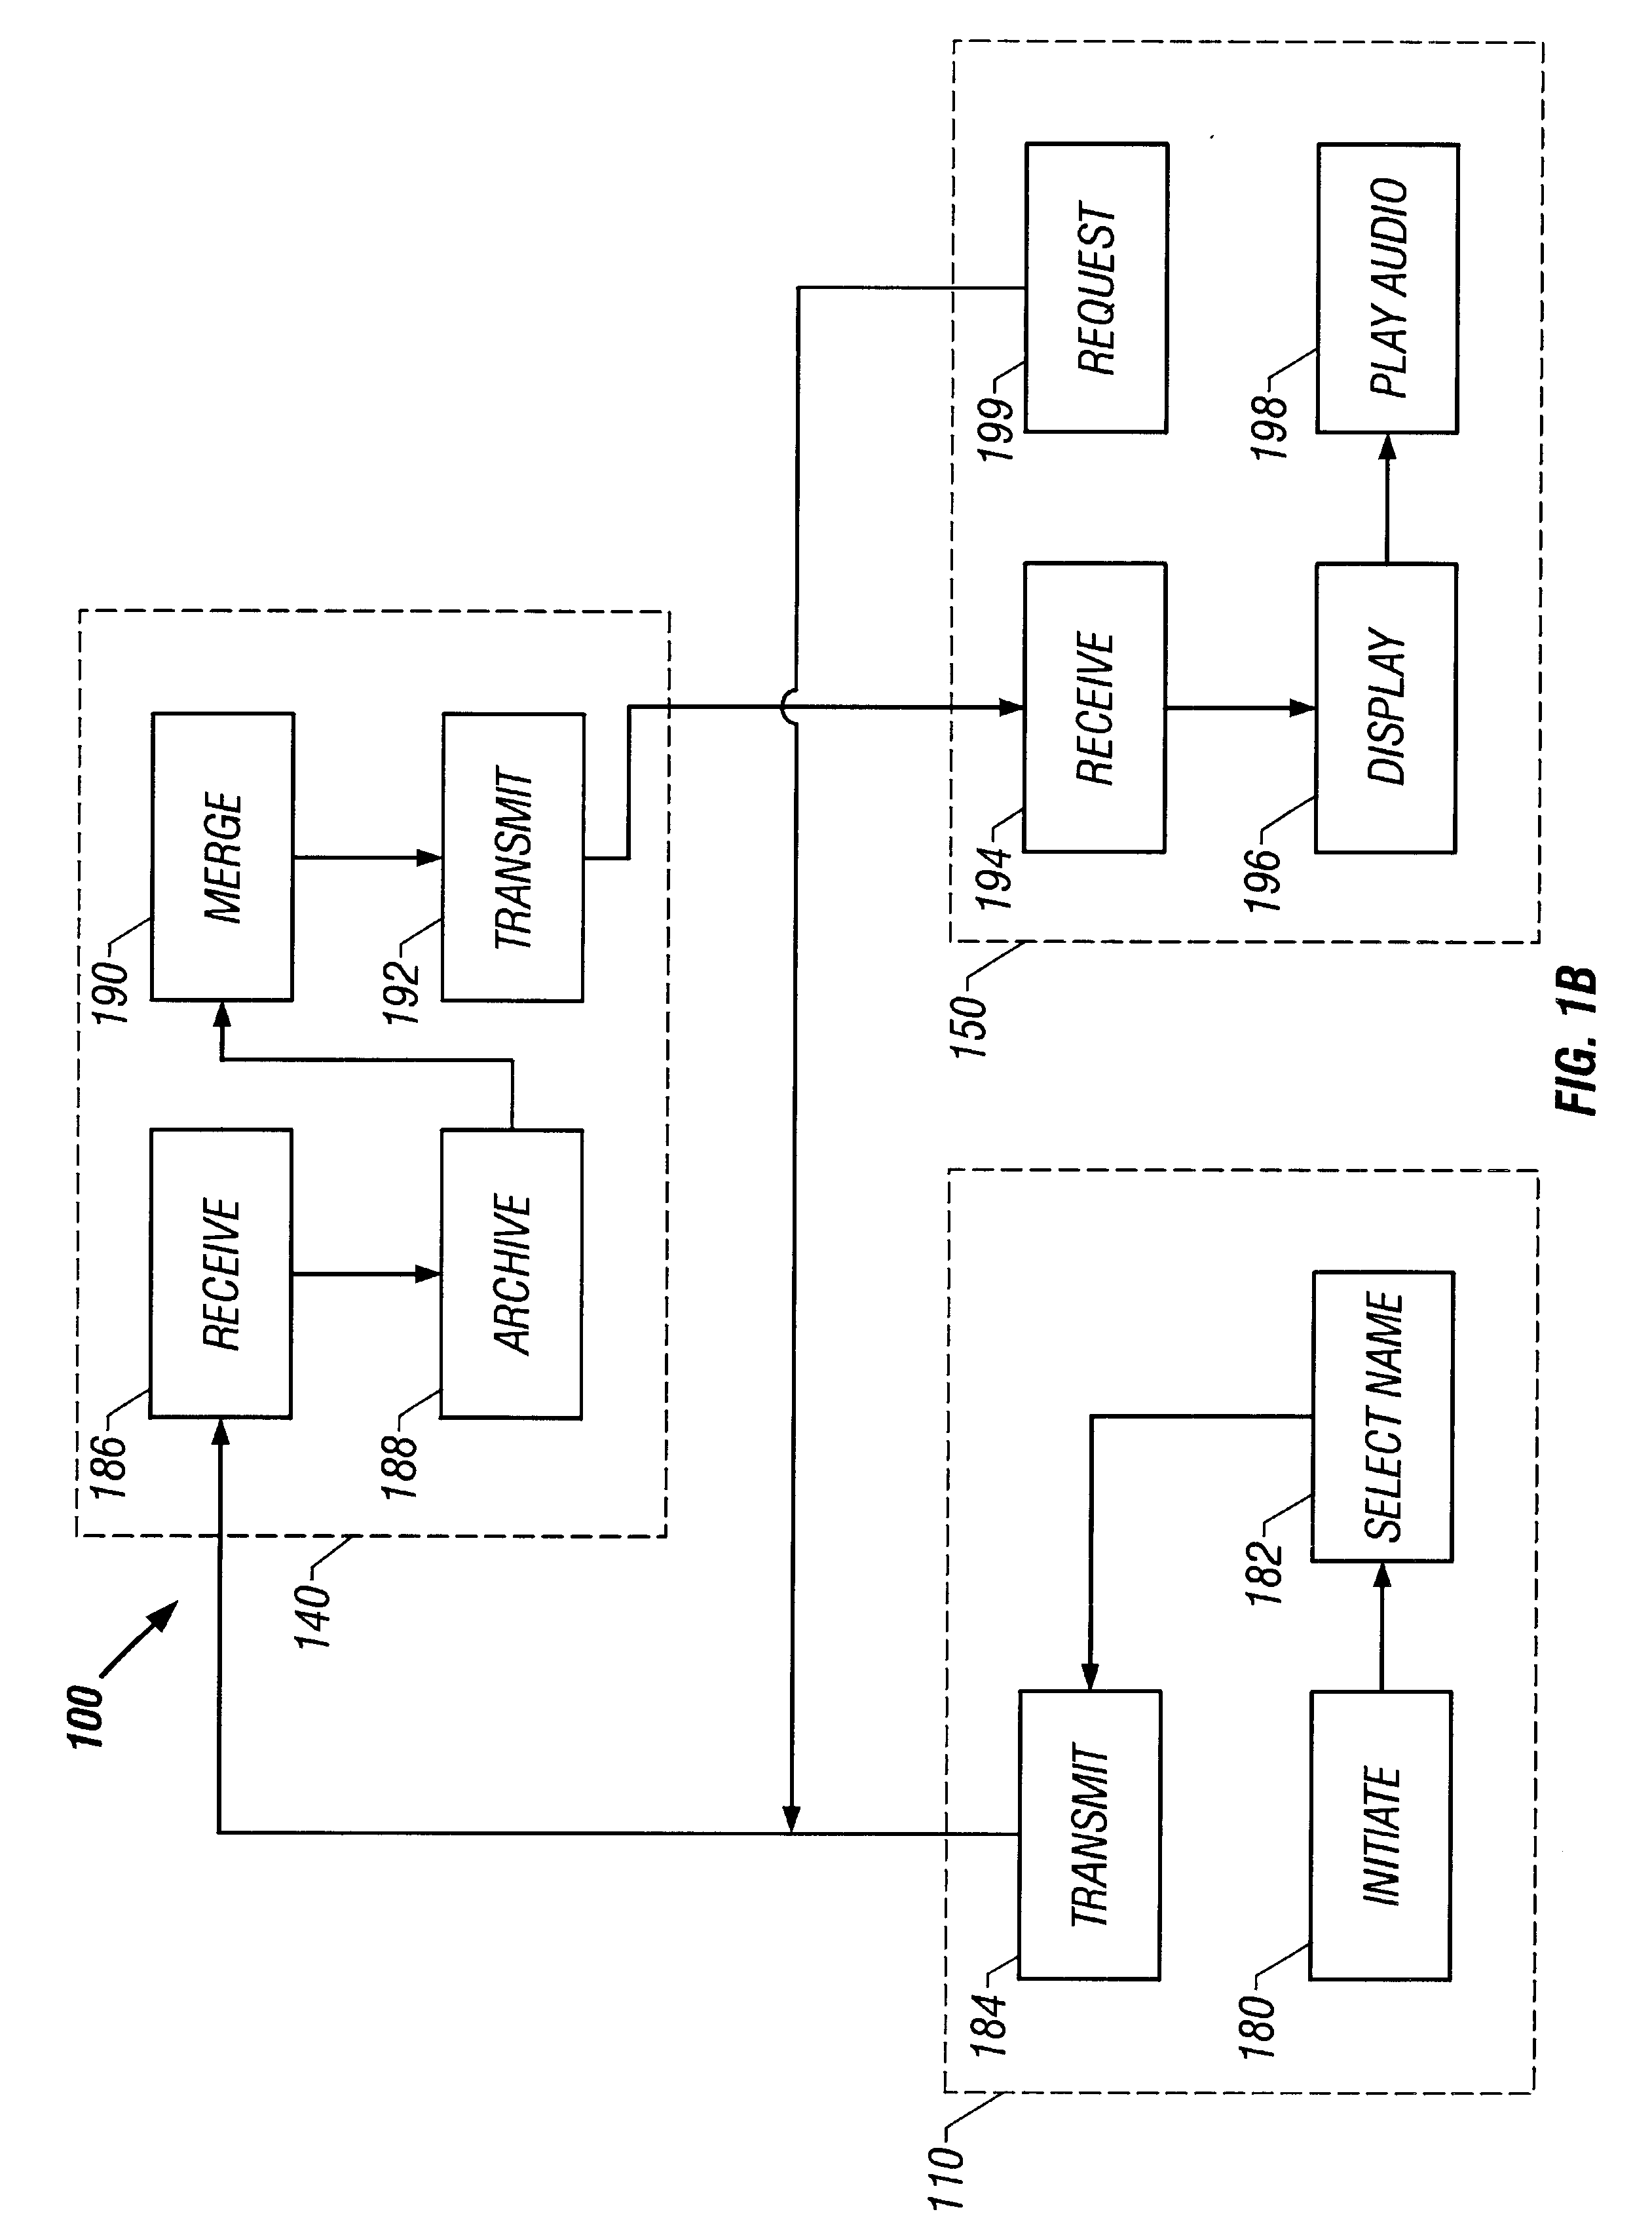 System and method for record and playback of collaborative Web browsing session